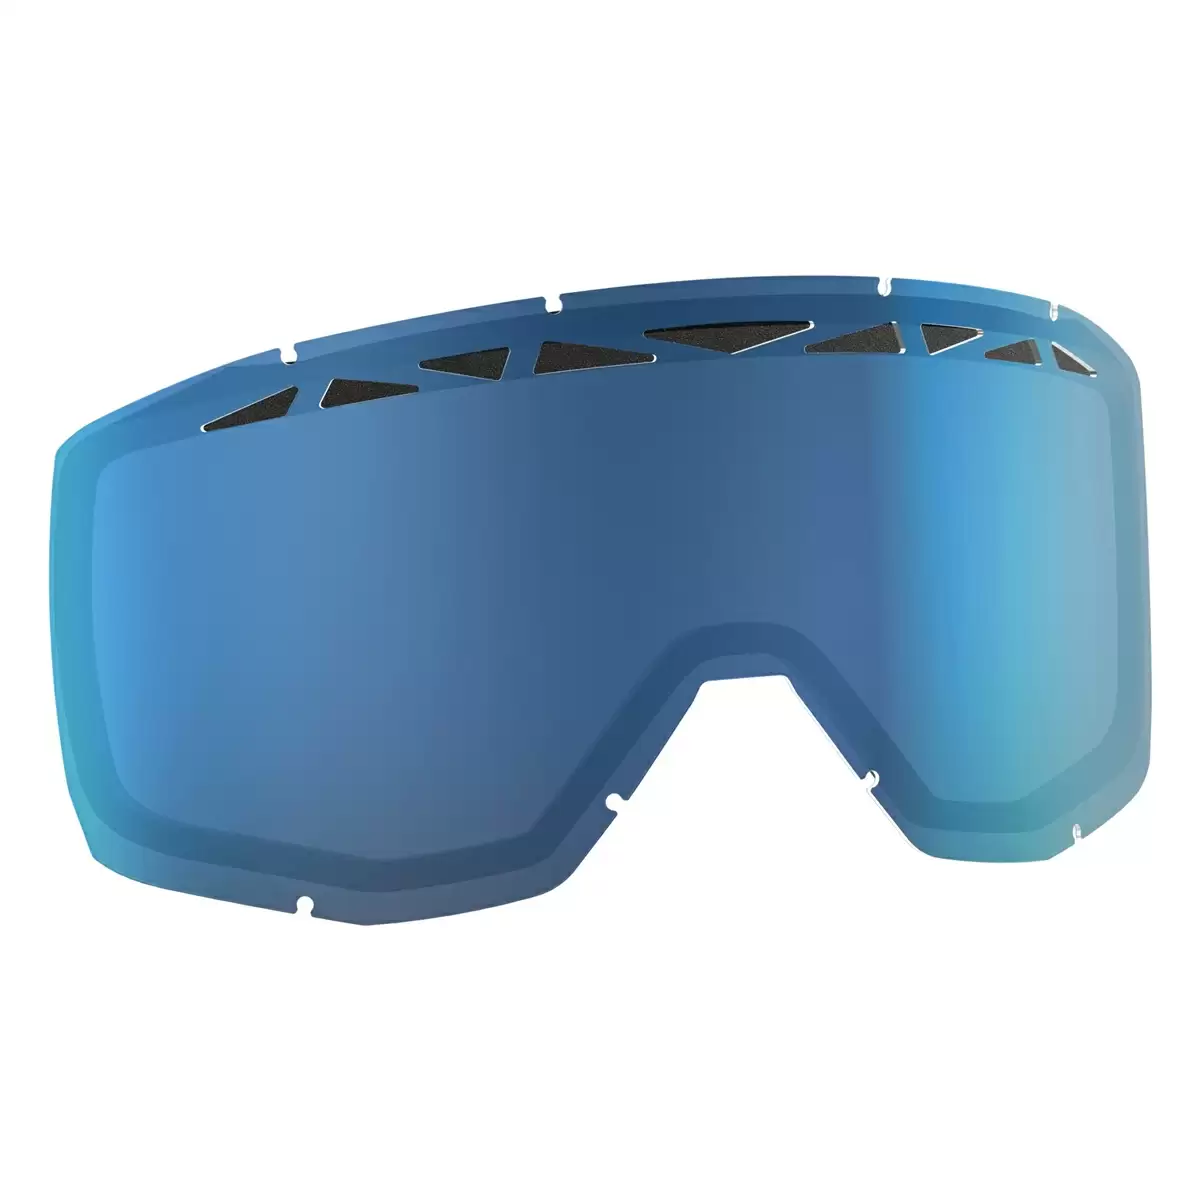 Replacement Double lens with ACS for HUSTLE/PRIMAL/SPLIT OTG/TYRANT Goggles - Blue Antifog - image